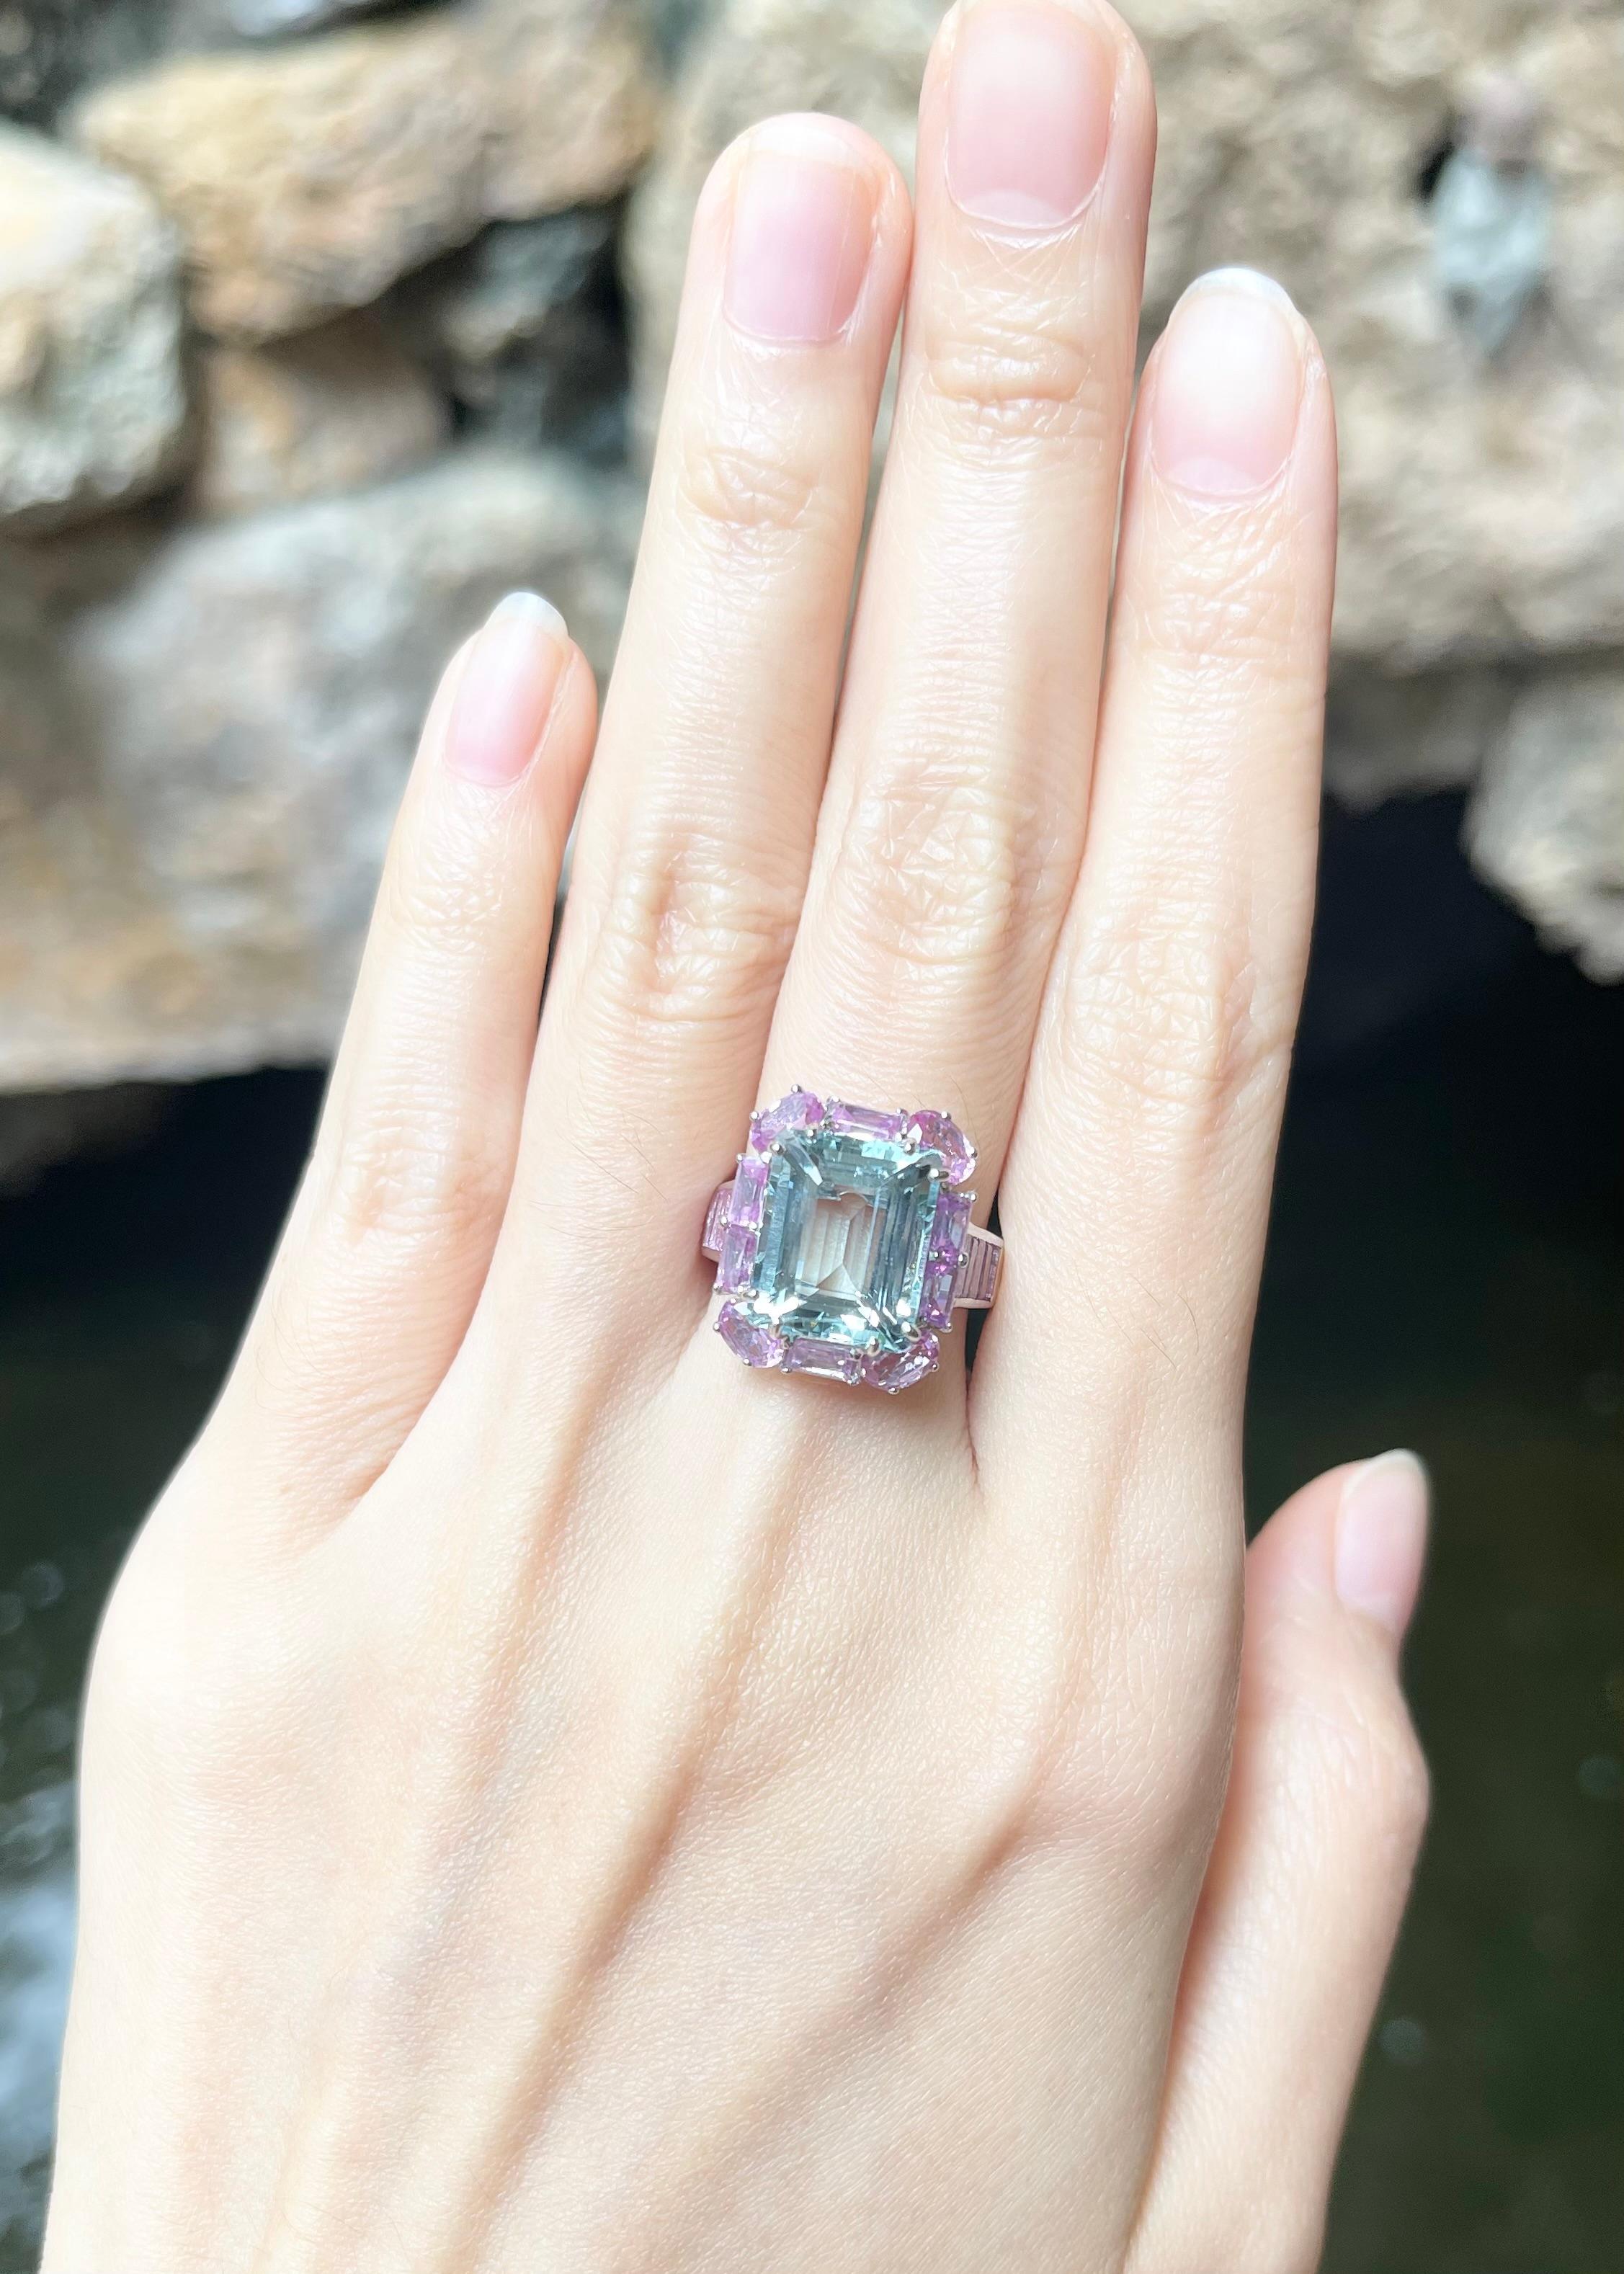 Aquamarine 5.18 carats and Pink Sapphire 6.04 carats Ring set in 18K White Gold Settings

Width:  1.4 cm 
Length: 1.7 cm
Ring Size: 53
Total Weight: 8.07 grams

Aquamarine 
Width:  1.0 cm 
Length: 1.3 cm

